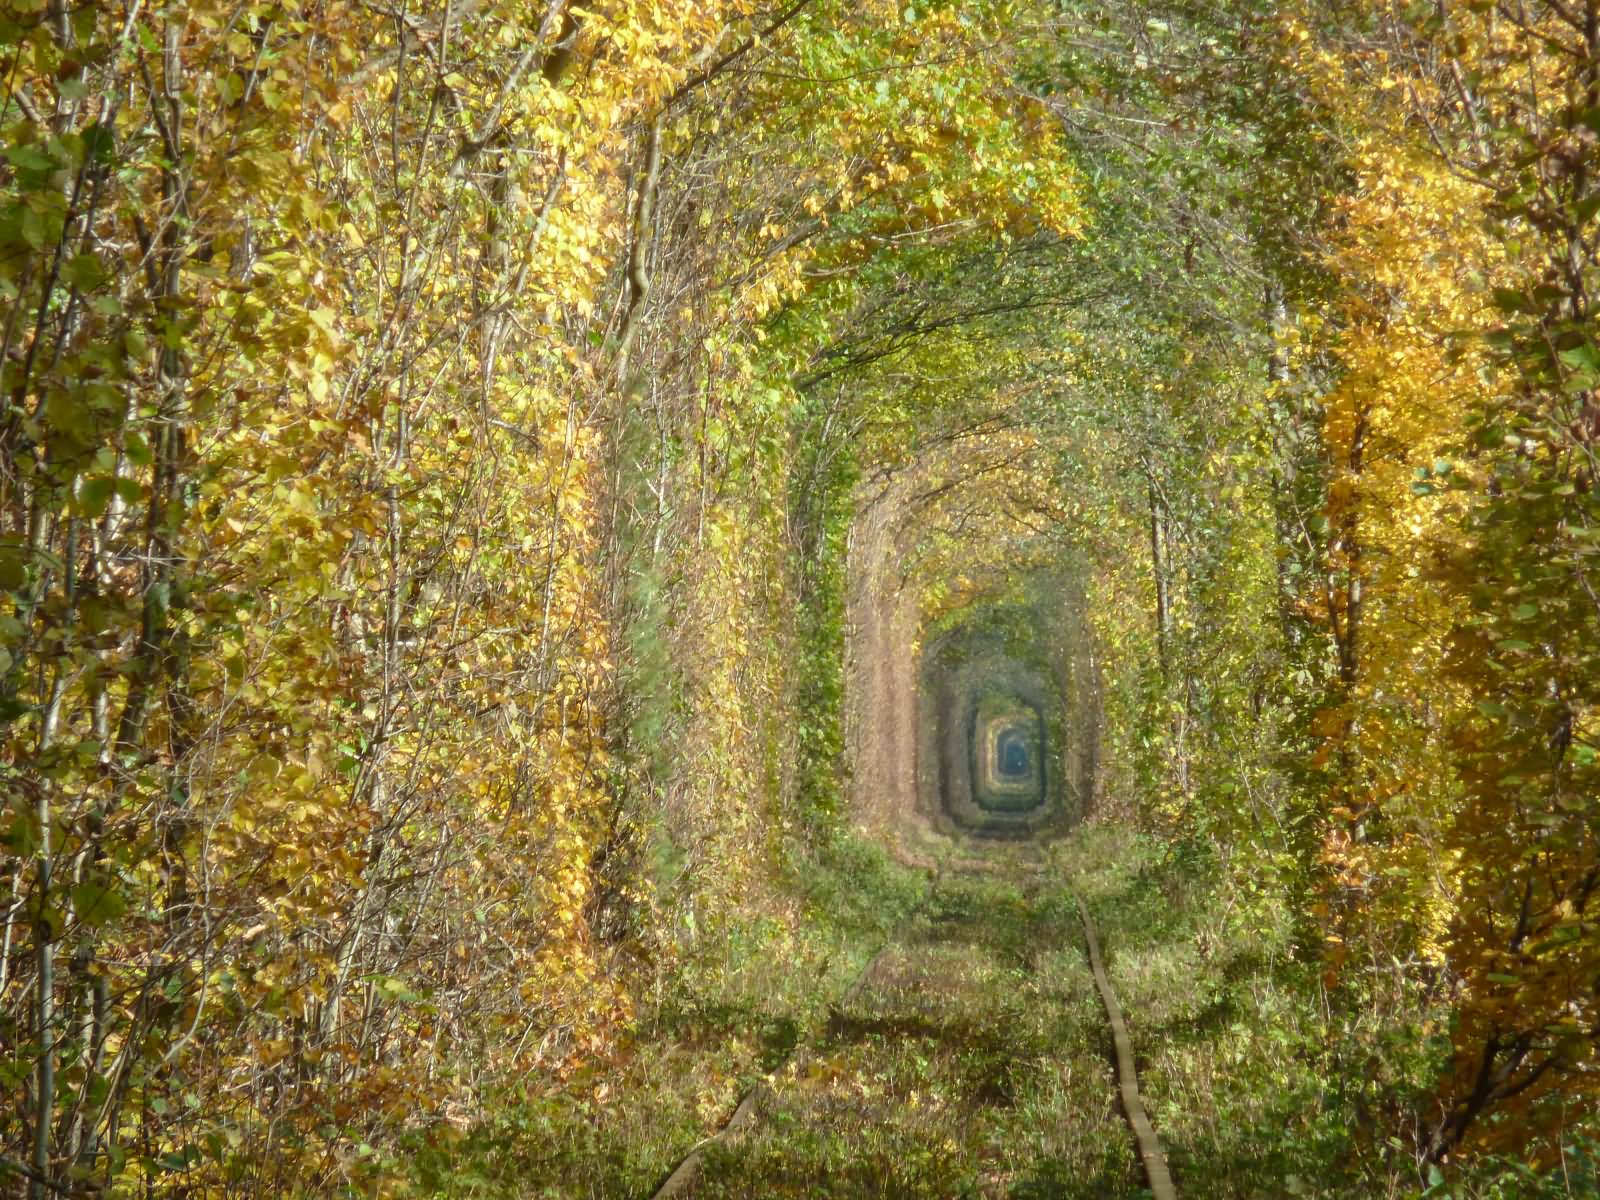 Adorable View Of The Tunnel Of Love In Klevan, Ukraine